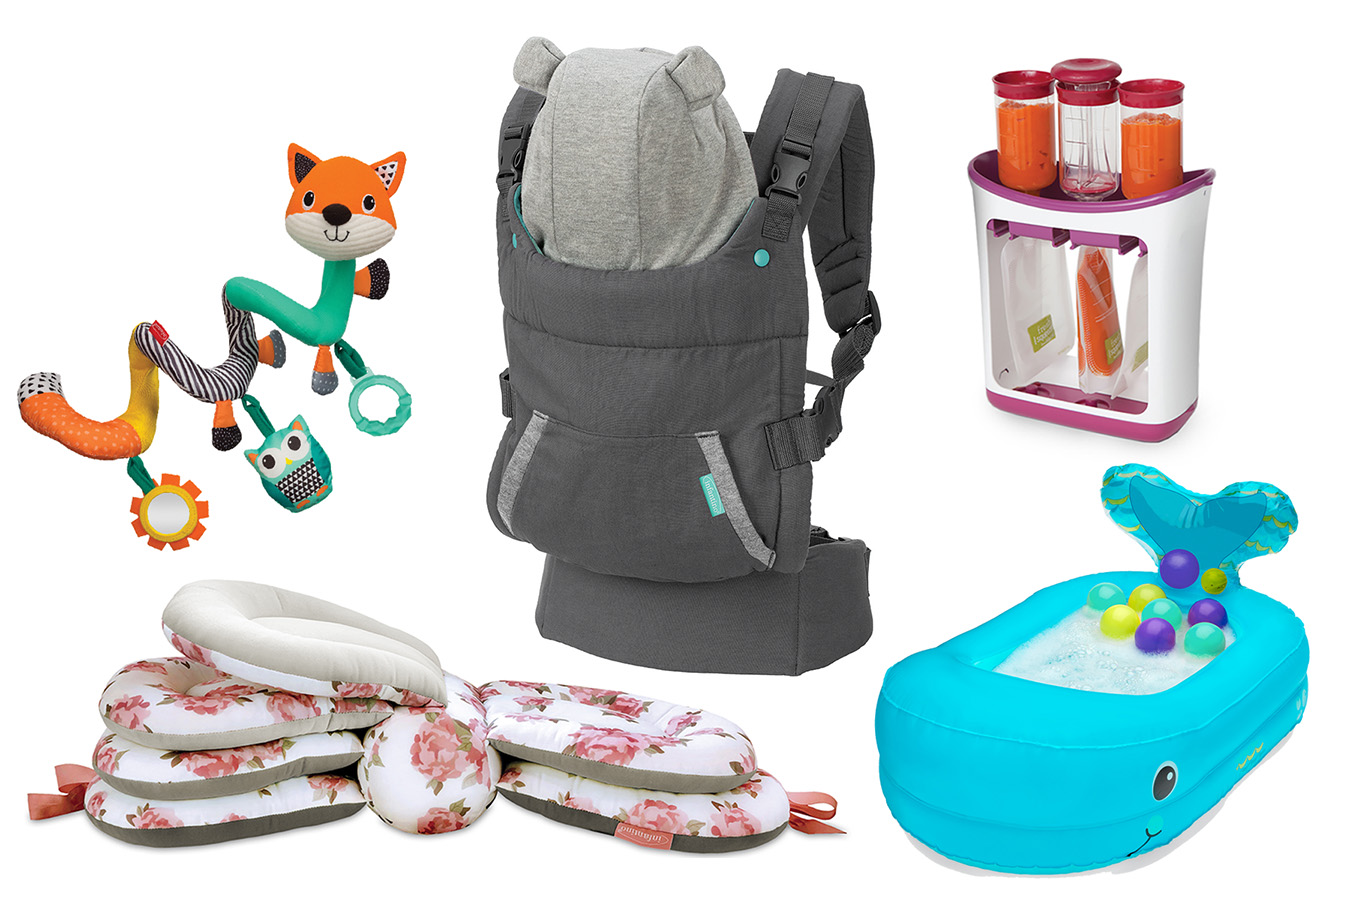 Infantino carriers and toys for babies. Story published on Metro Mom by Meghann Hernandez